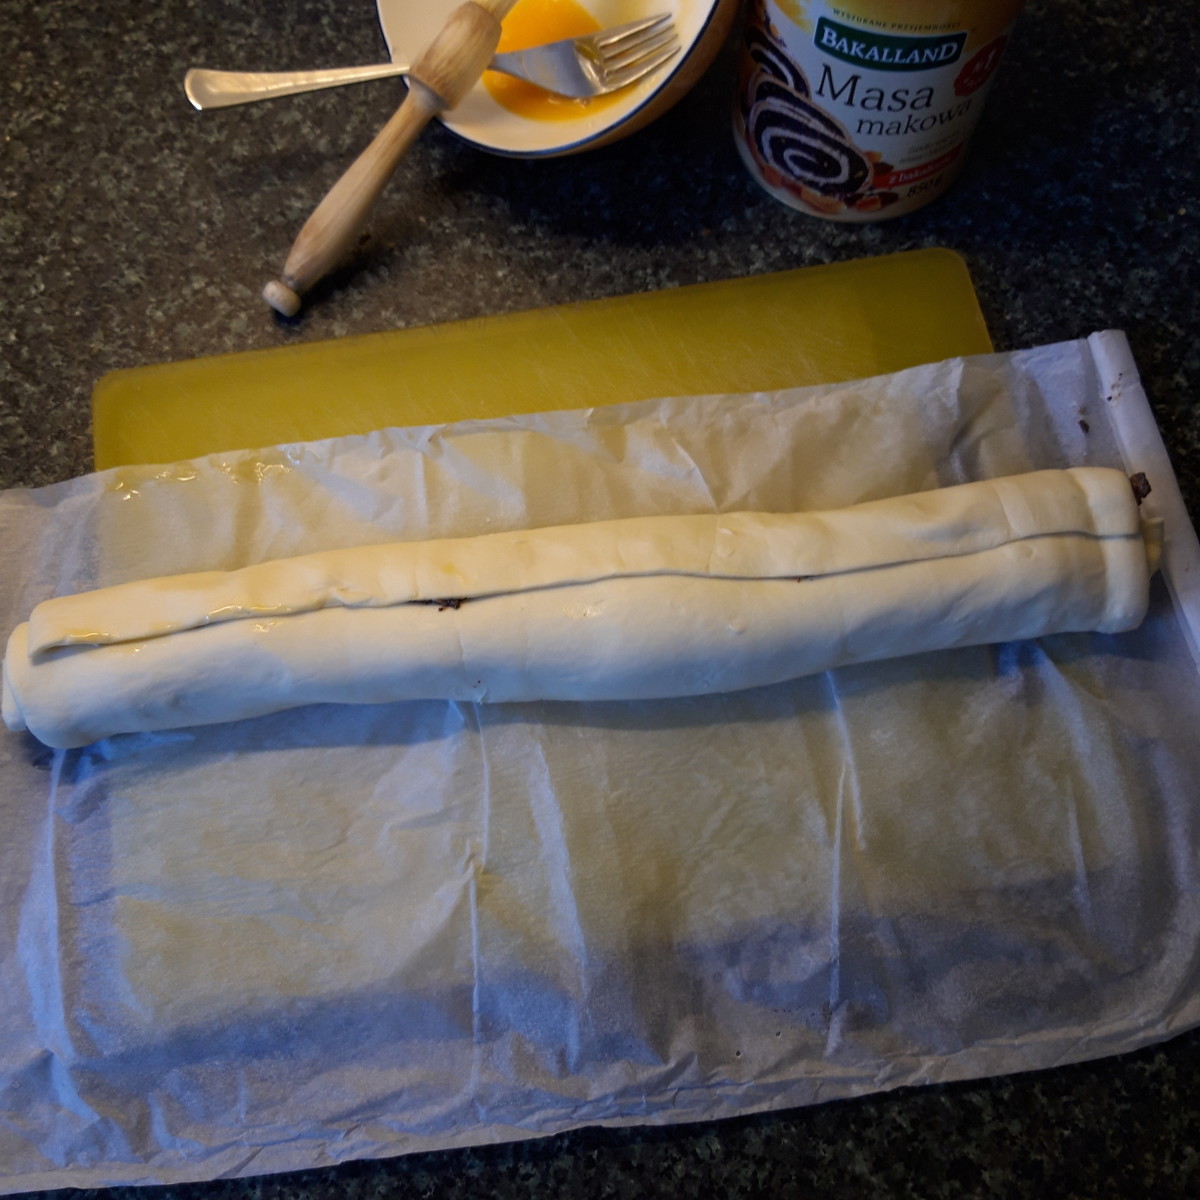 Roll pastry lengthwise into a long sausage